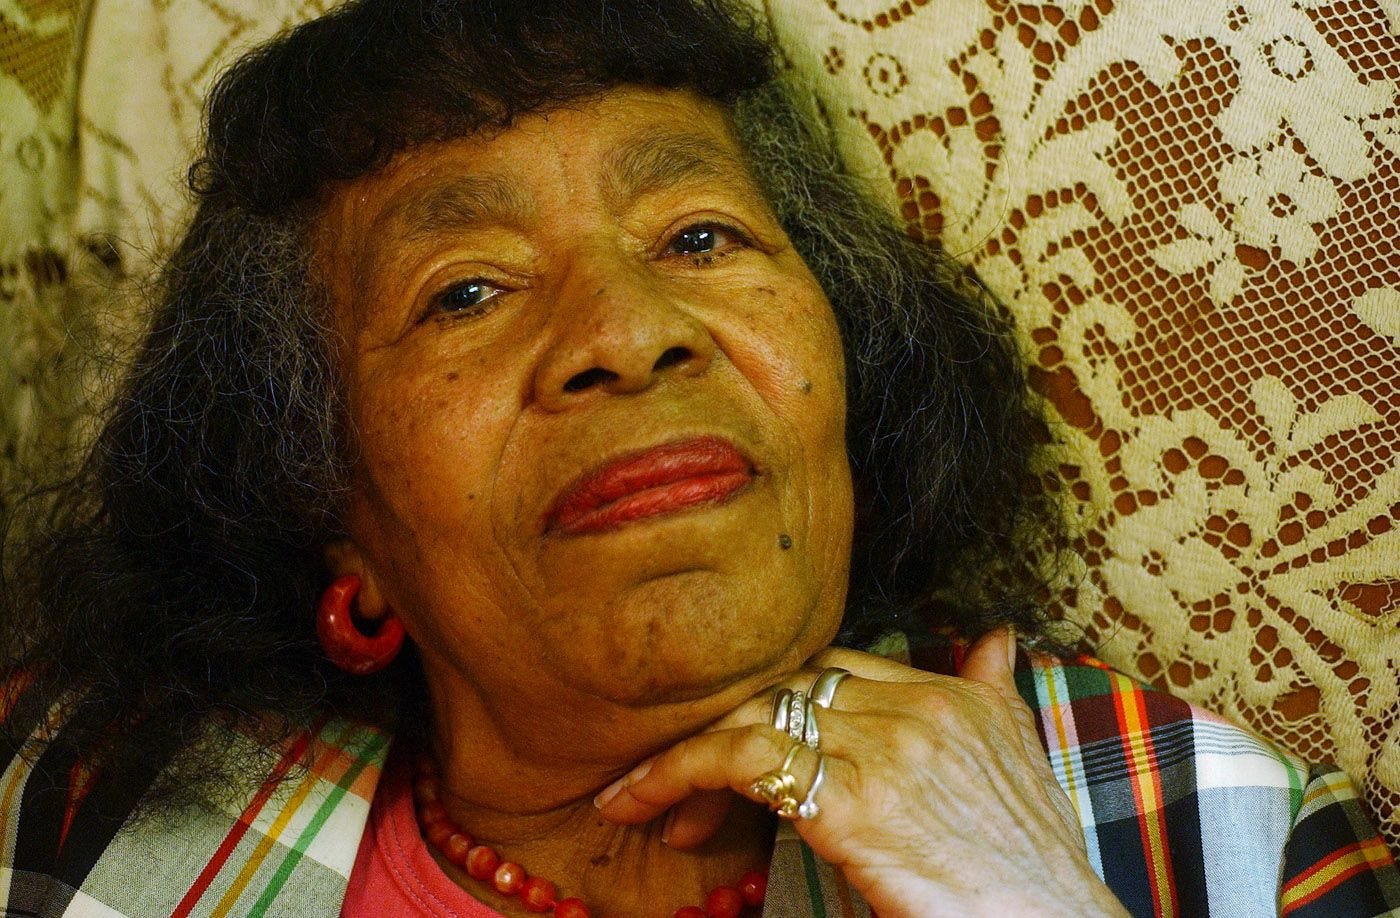 Lucille Times marched in Alabama for voting rights.